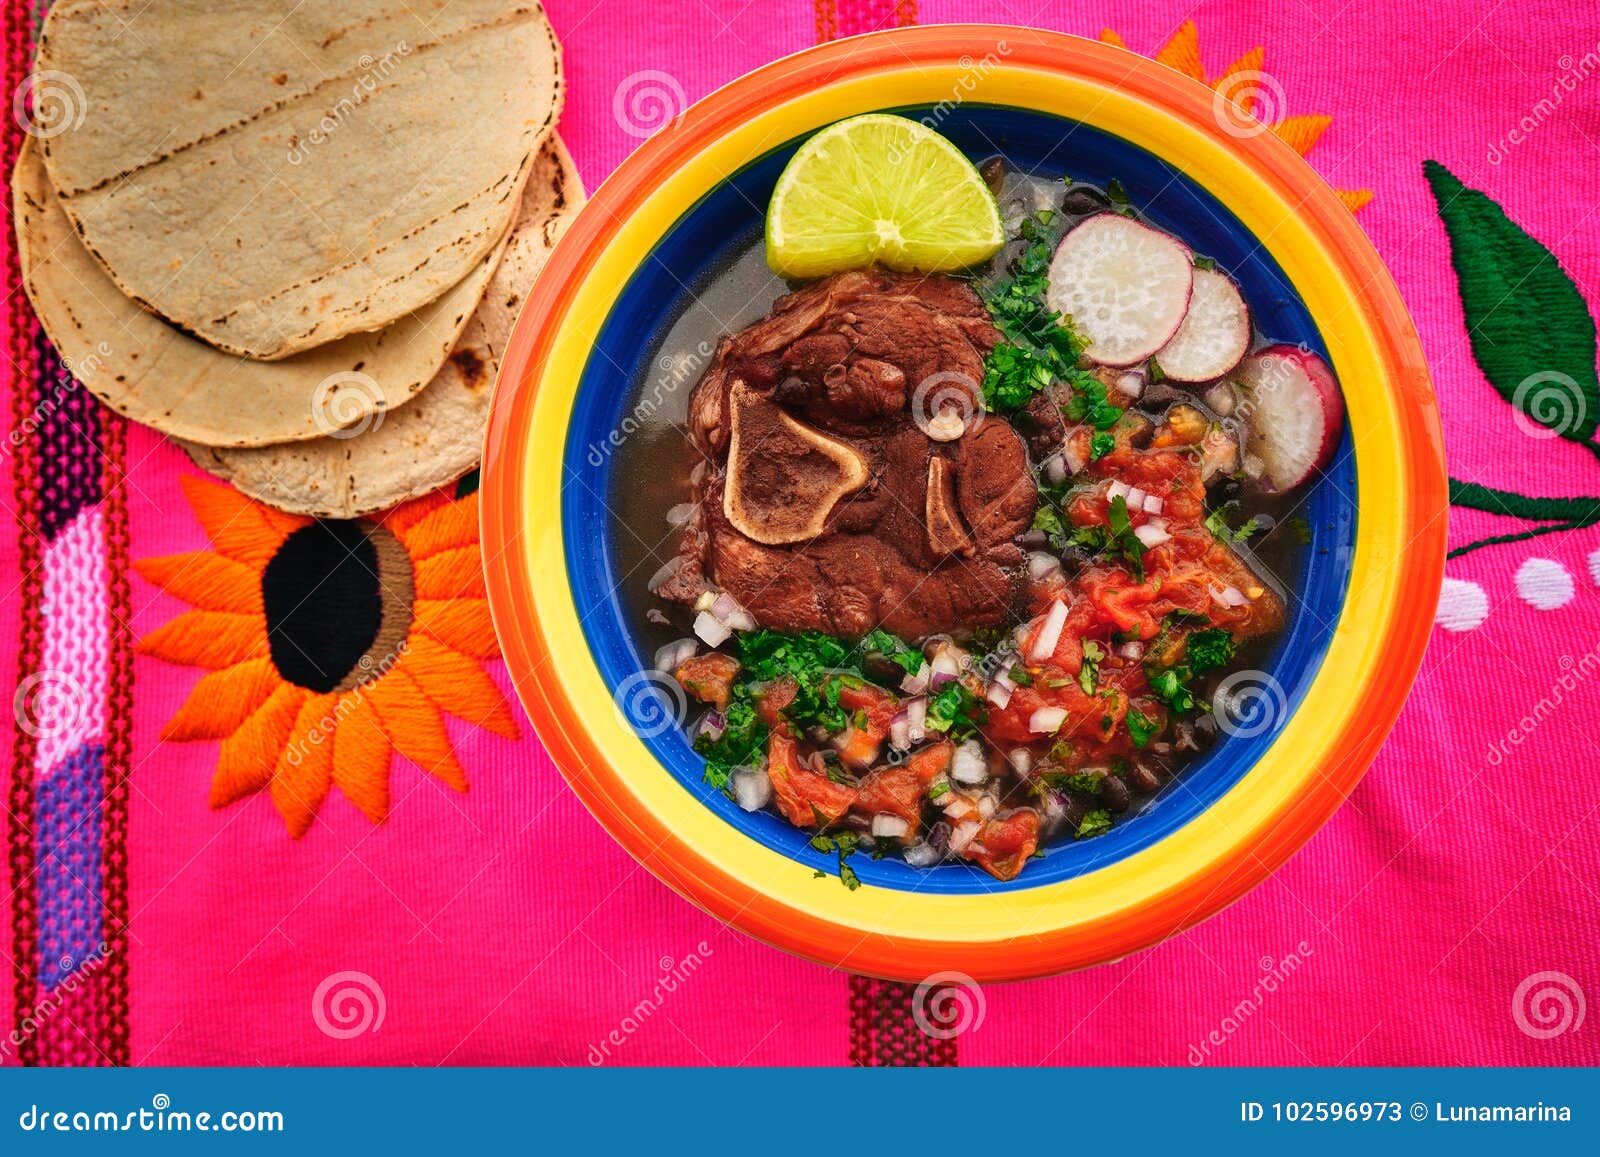 mexican beef with frijoles and tortillas